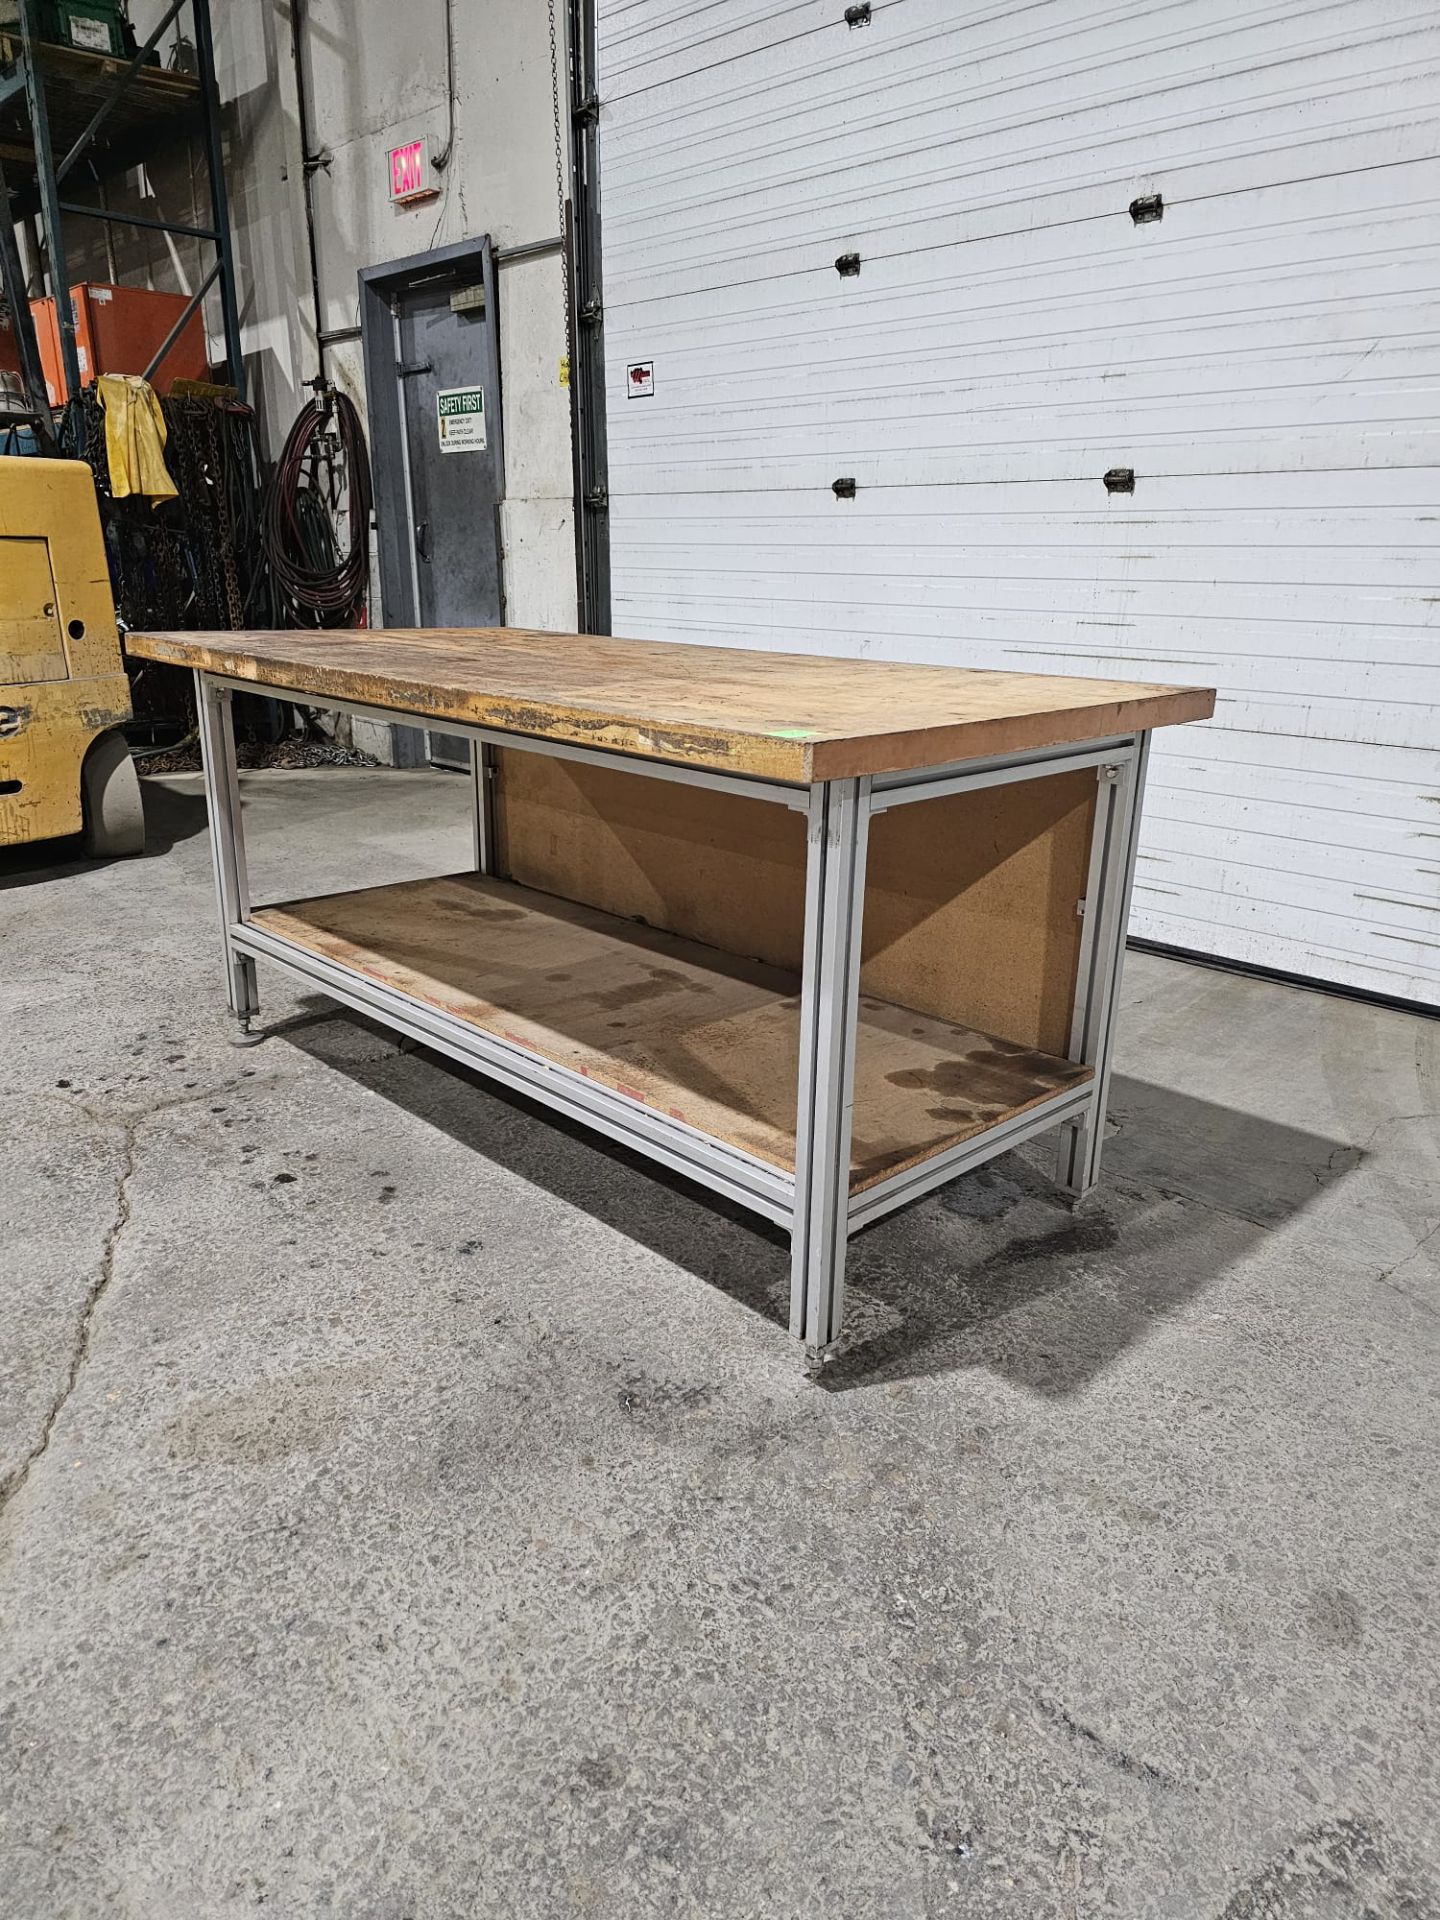 Table 36" x 72" x 34.5"h bottom shelf: 24" w x 69" - Aluminum frame with wooden top - Image 4 of 6